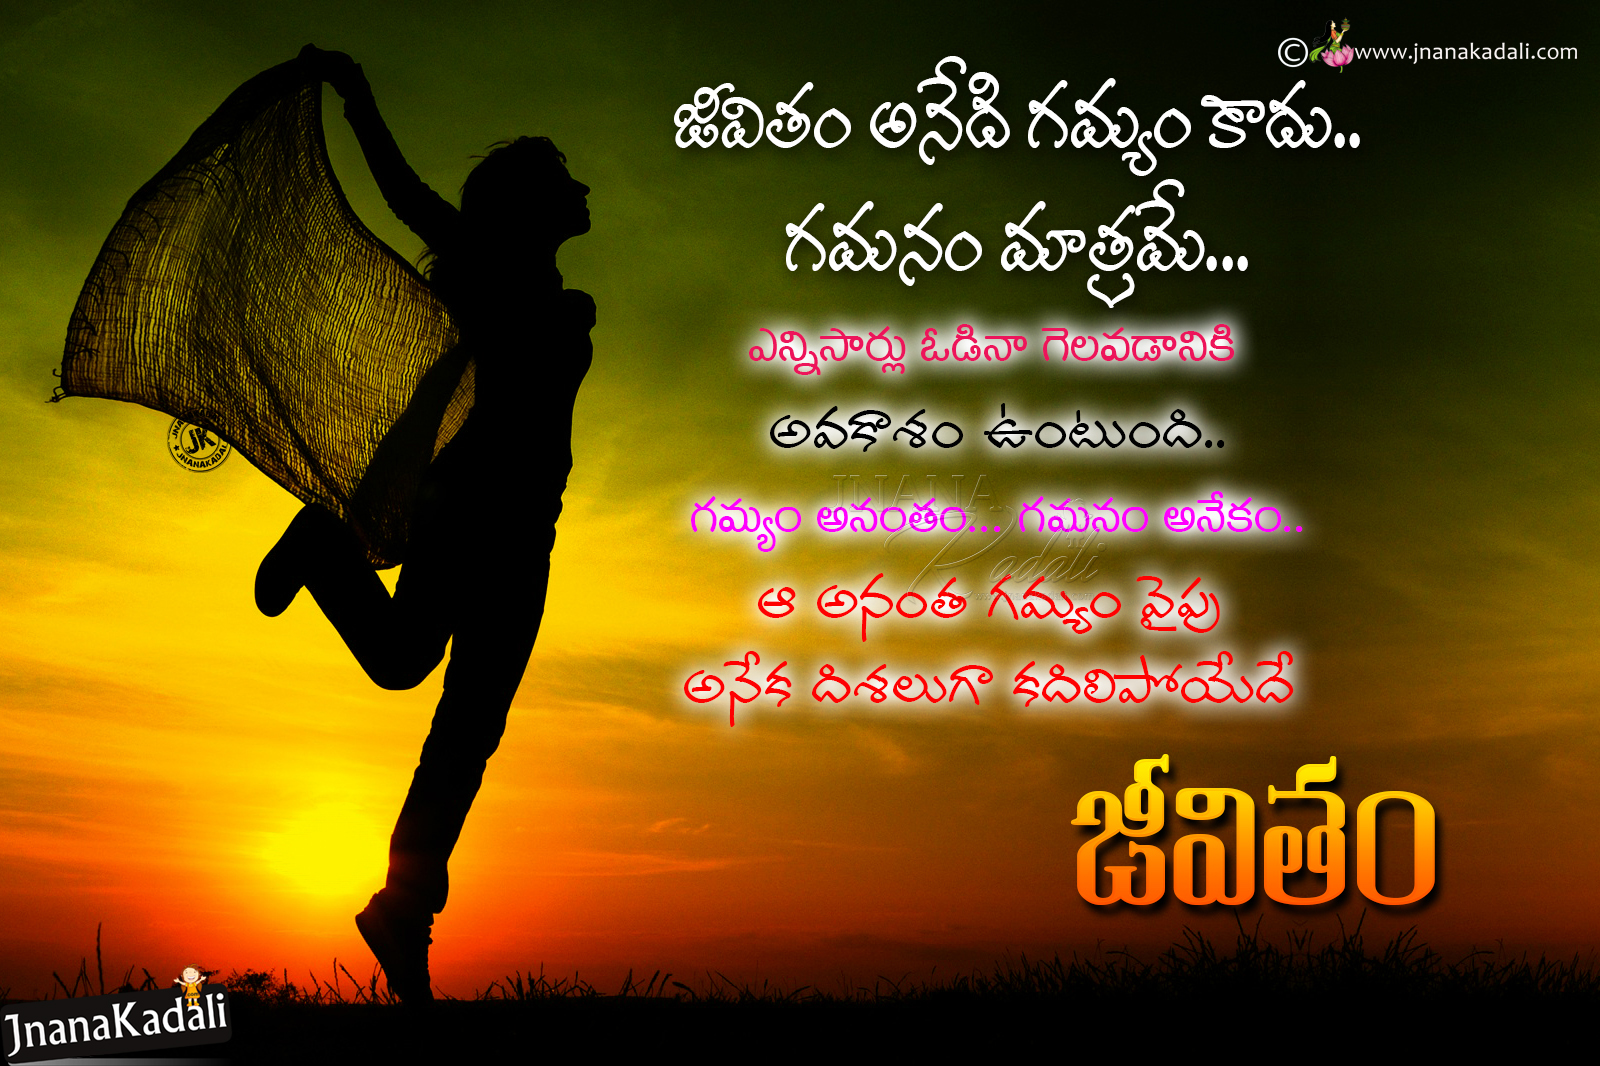 New Telugu Language Top 10 Famous Life Goals Quotations and Happy Life Quotes for